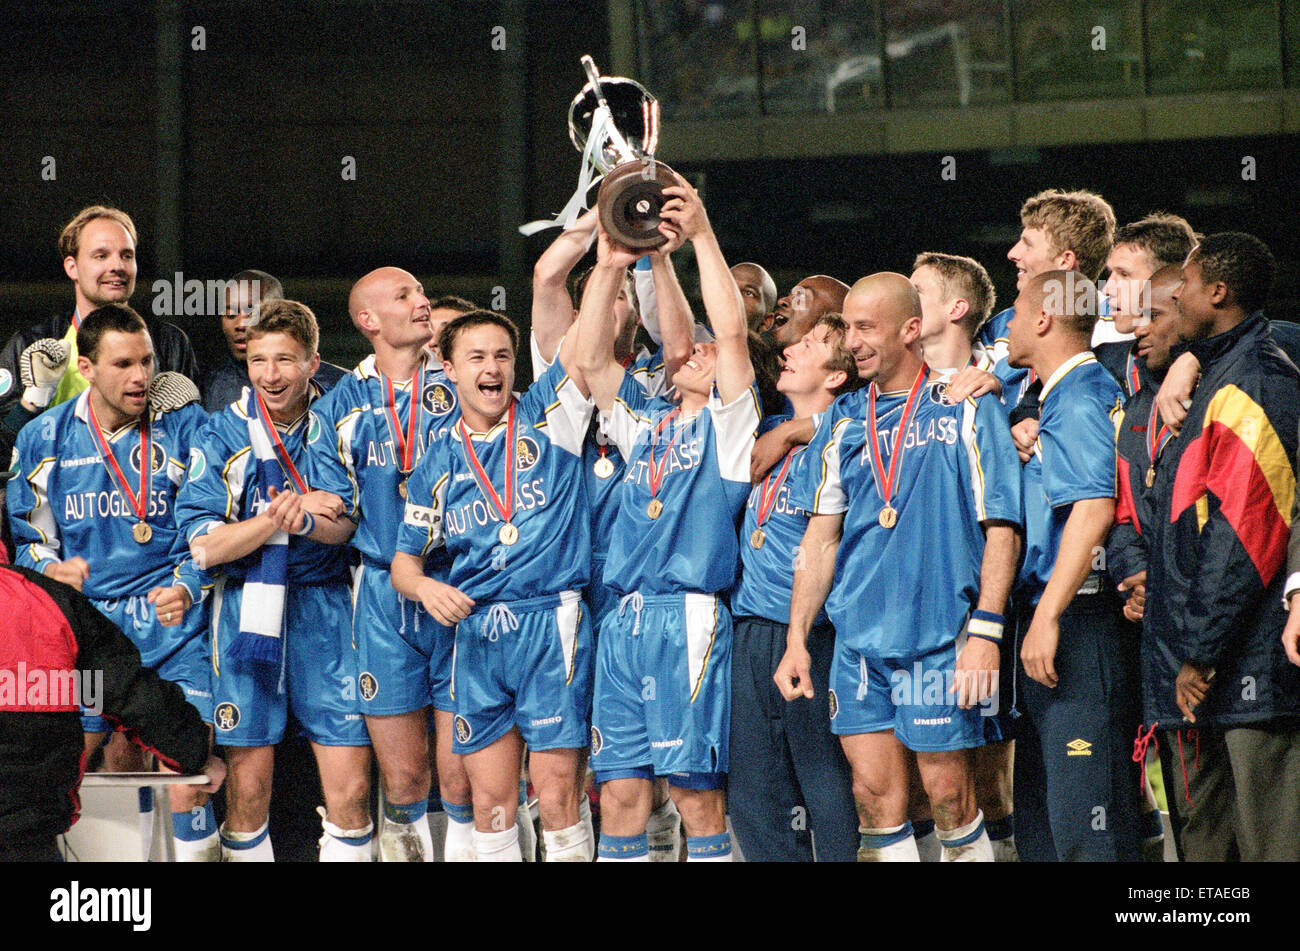 UEFA Cup Winners' Cup Final Chelsea v Stuttgart, held at Råsunda Stadium. Chelsea won the match 1-0, thanks to a Gianfranco Zola goal. 13th May 1998.